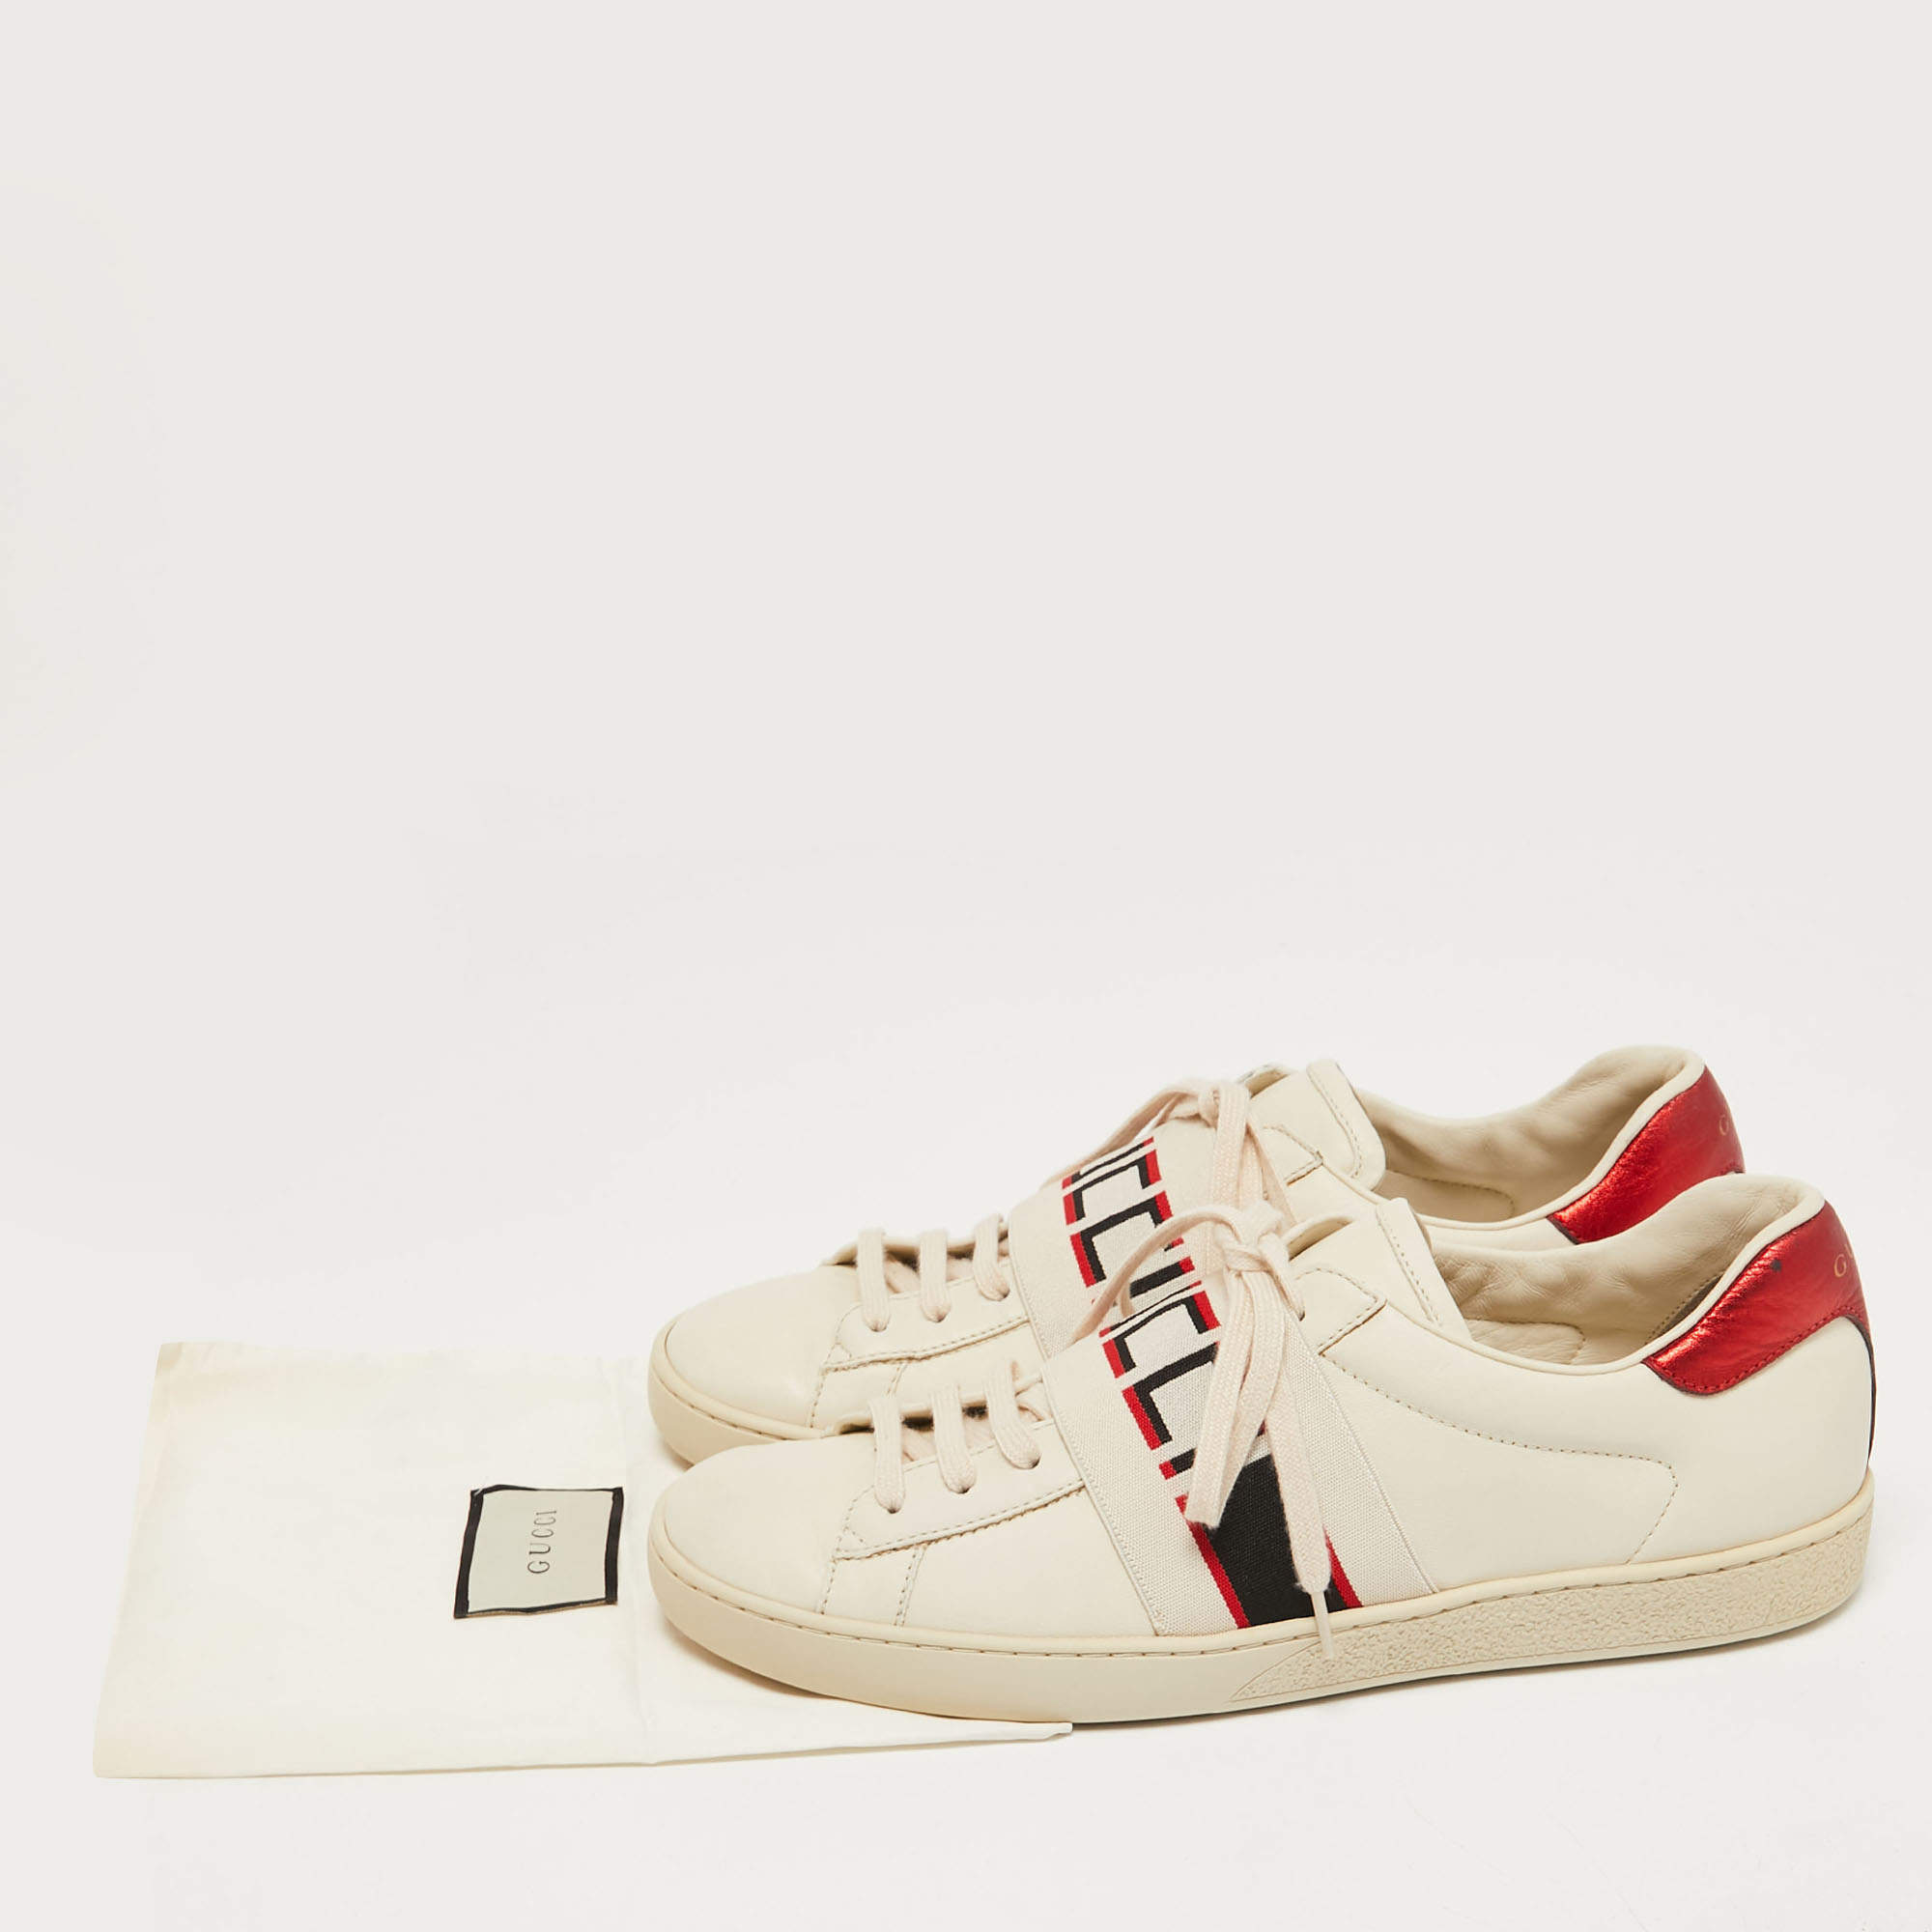 GUCCI Calfskin Web Mens Gucci Band Ace Sneakers 9.5 White 1227553